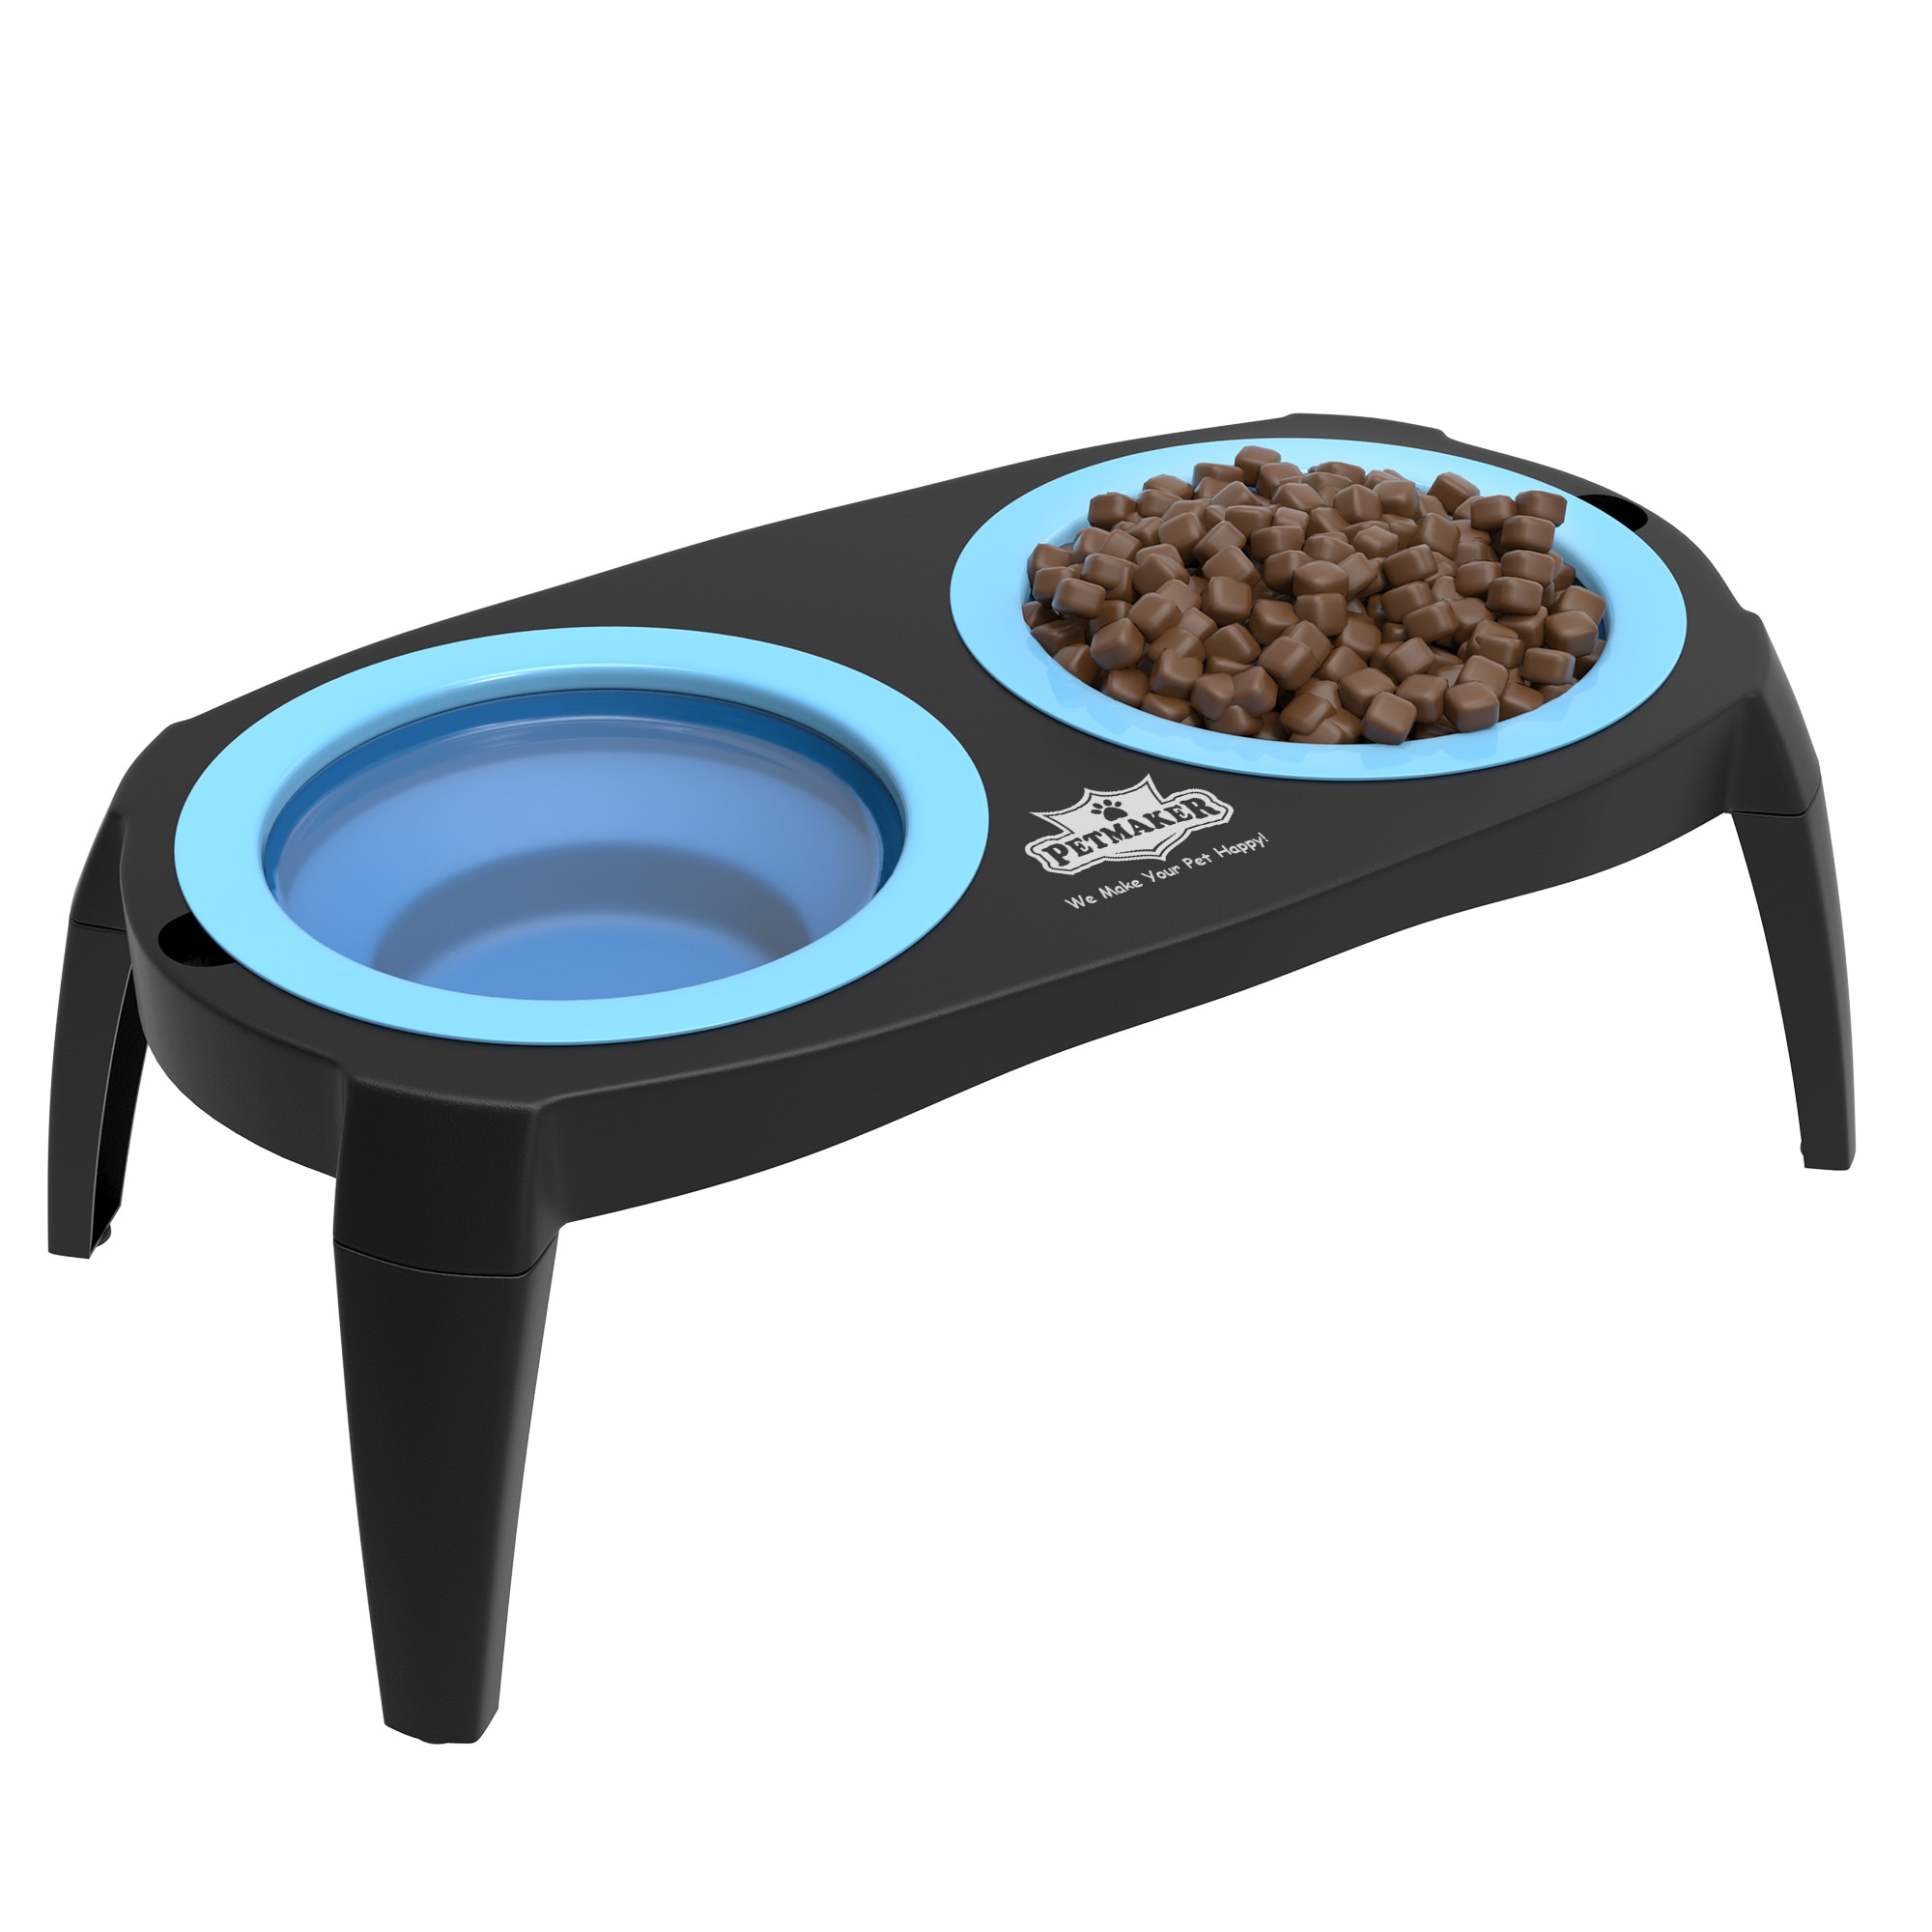 https://ak1.ostkcdn.com/images/products/20256449/Elevated-Pet-Bowls-with-Non-Slip-Stand-16-Oz-f1aa8de8-c990-4113-ac31-1607c9245e1f.jpg